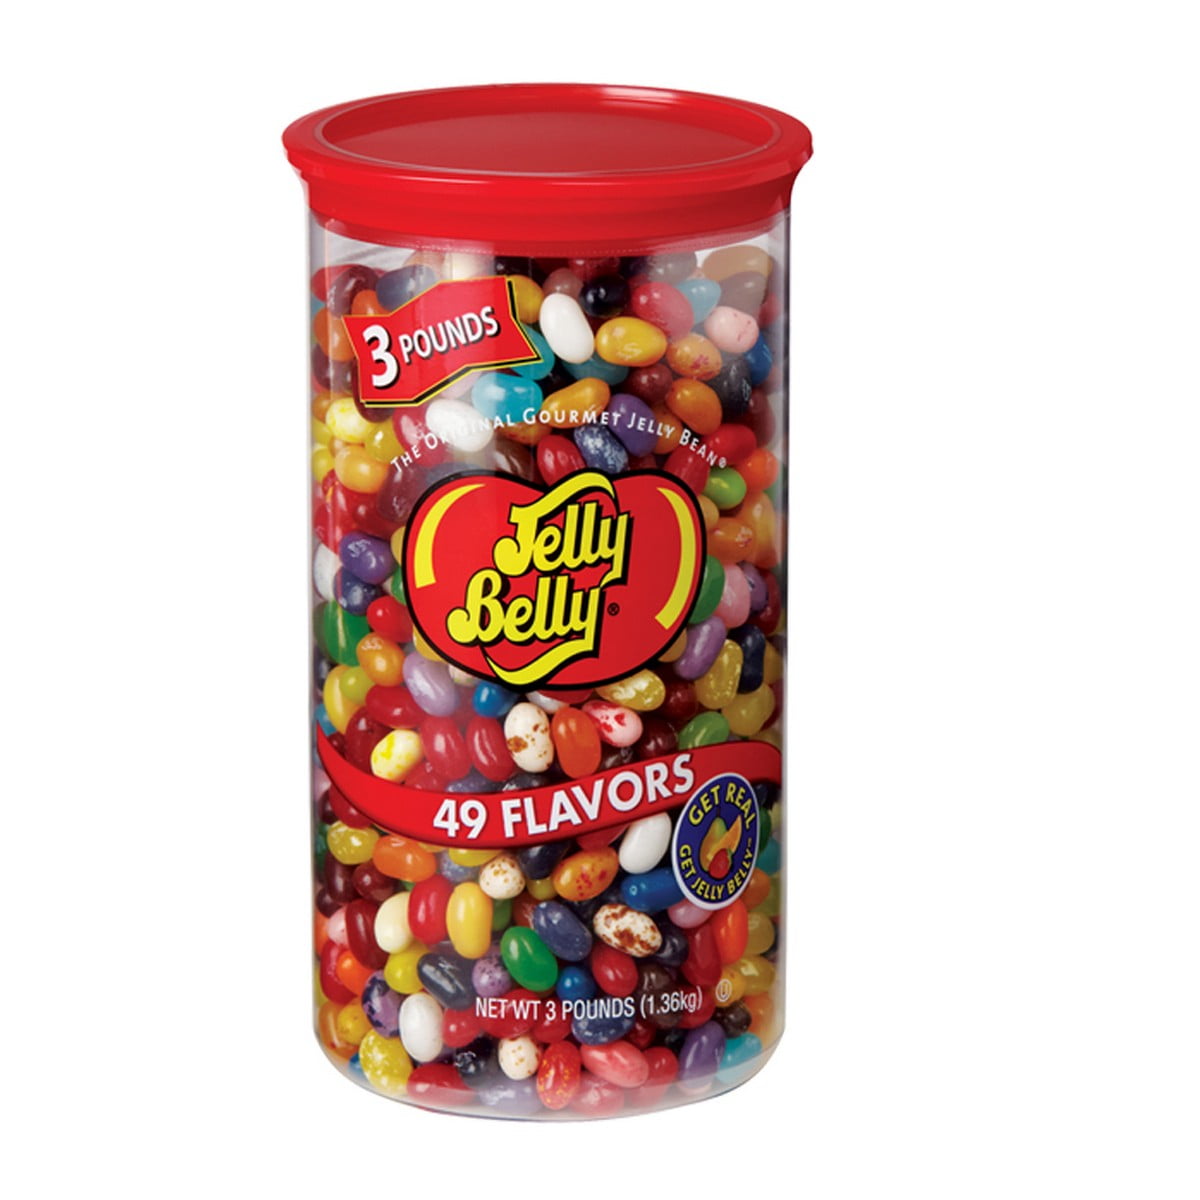 Snowflake Chocolates - Jelly Belly 49 Flavor Jelly Beans